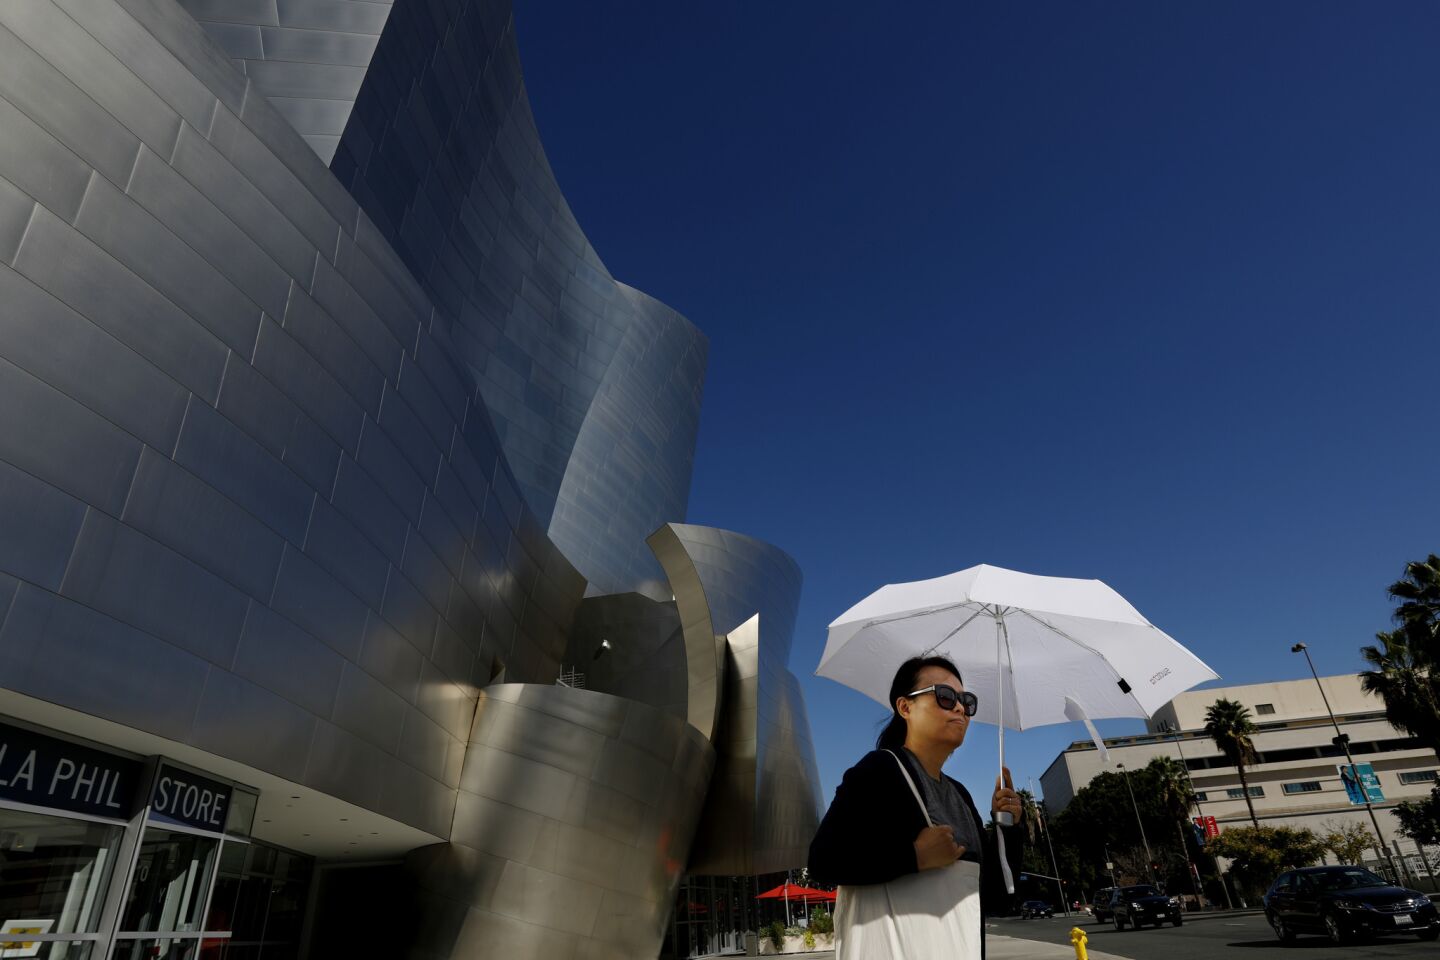 A pedestrian walking by Disney Concert Hall in downtown Los Angeles uses an umbrella for shade during the October heat wave.